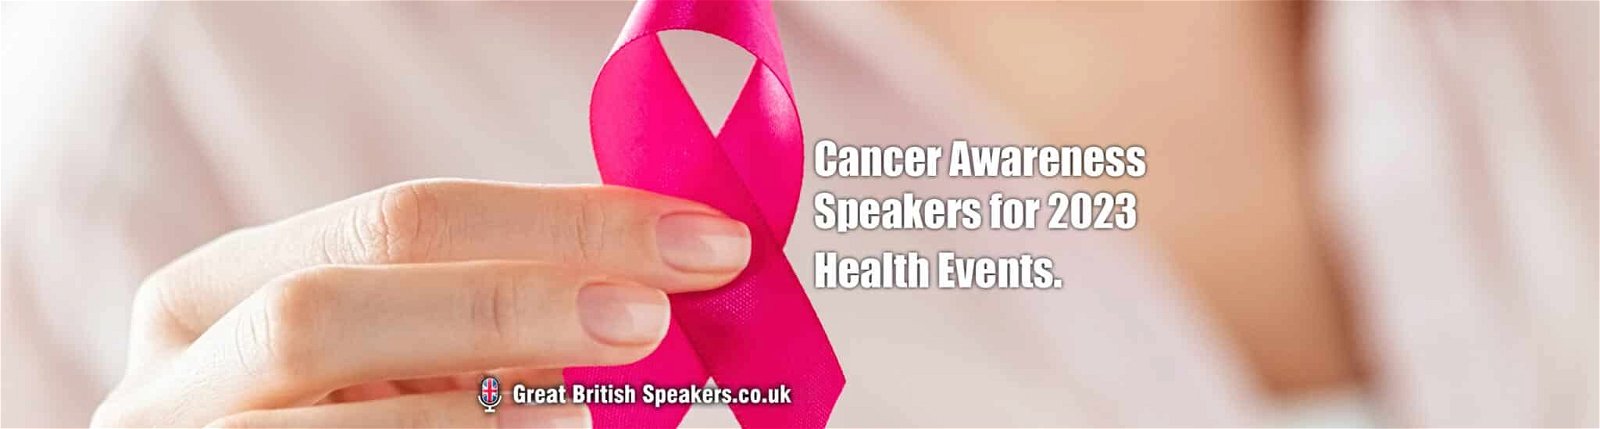 Cancer Awareness Speakers for 2023 Health Events